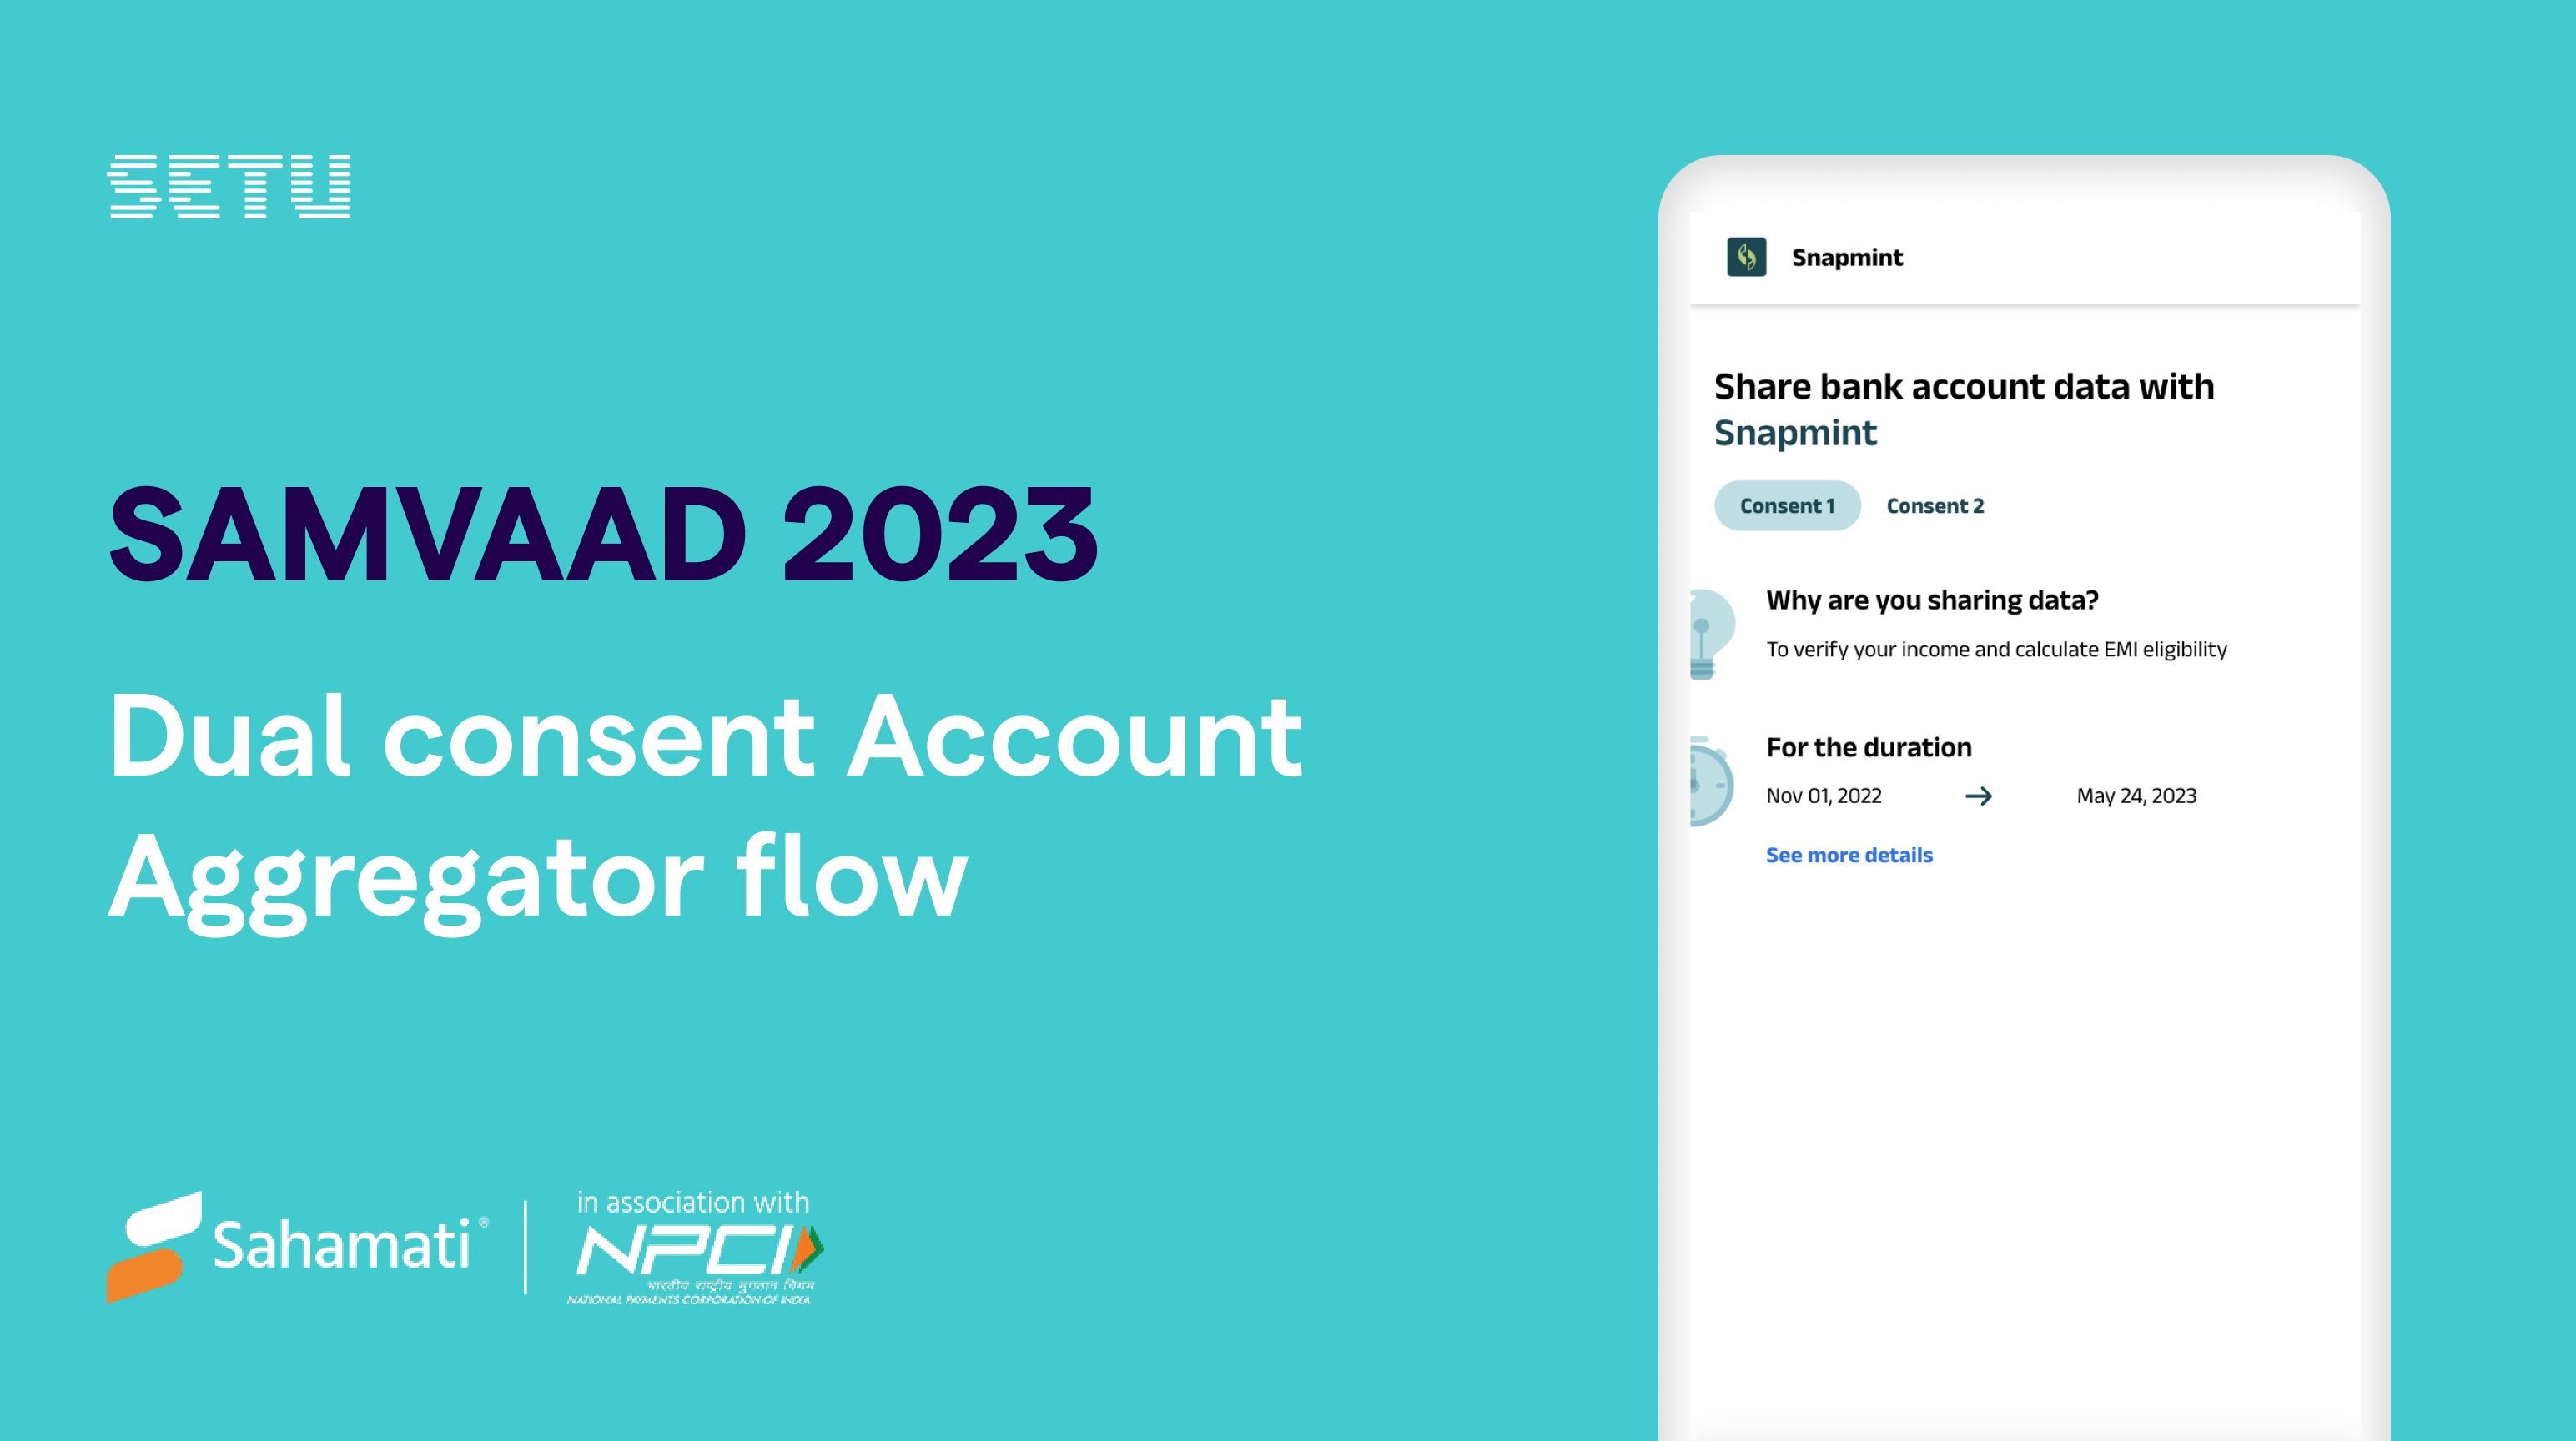 How we bagged an award for our ‘Dual consent Account Aggregator flow’ in Samvaad2023 title image